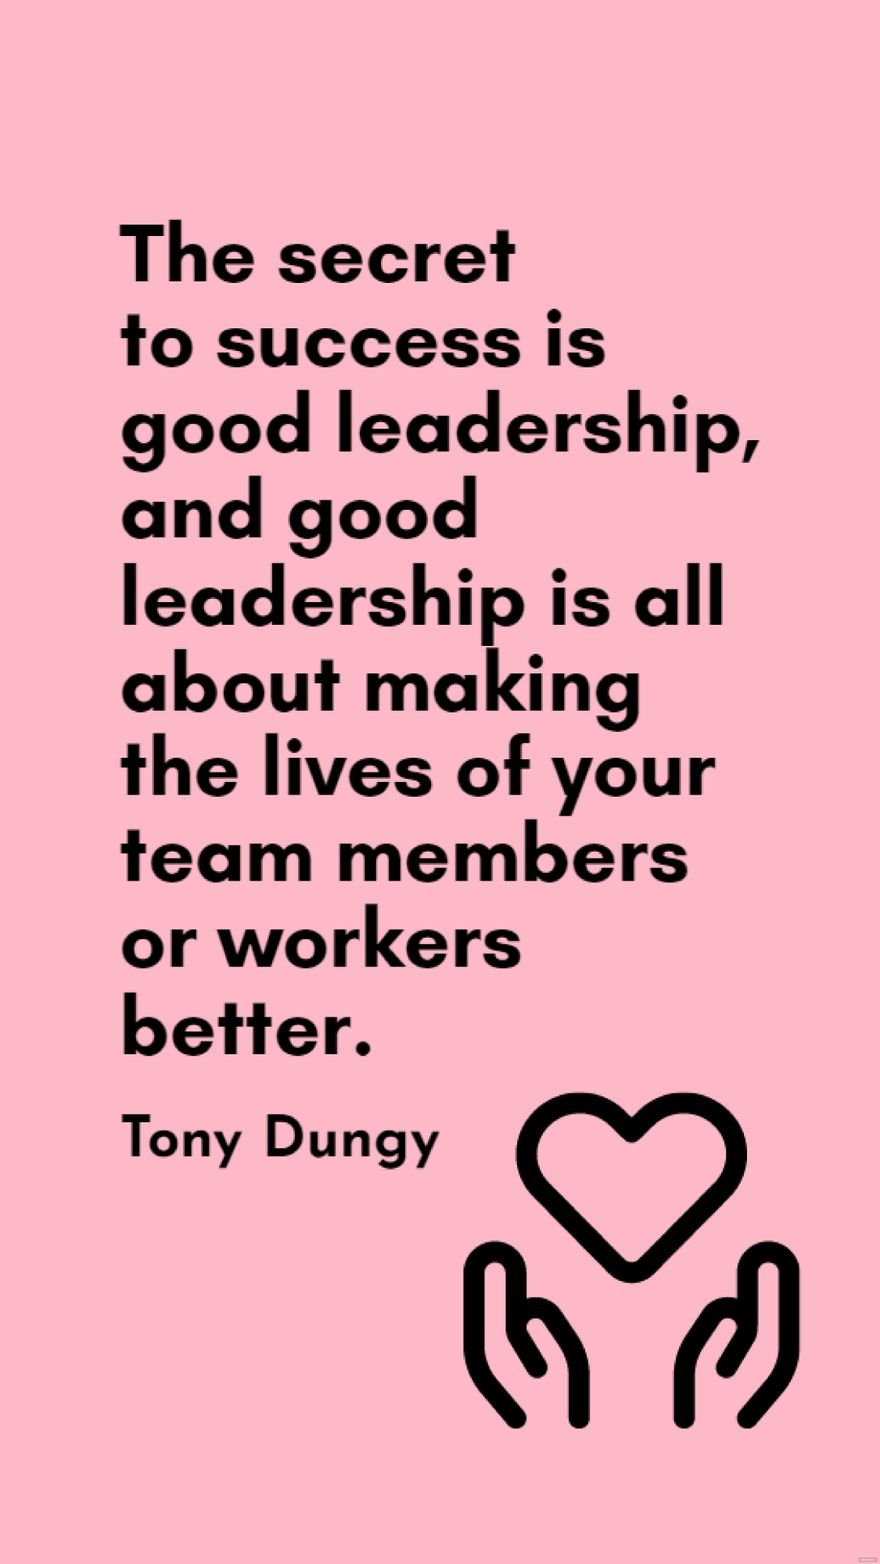 Tony Dungy - The secret to success is good leadership, and good leadership is all about making the lives of your team members or workers better.